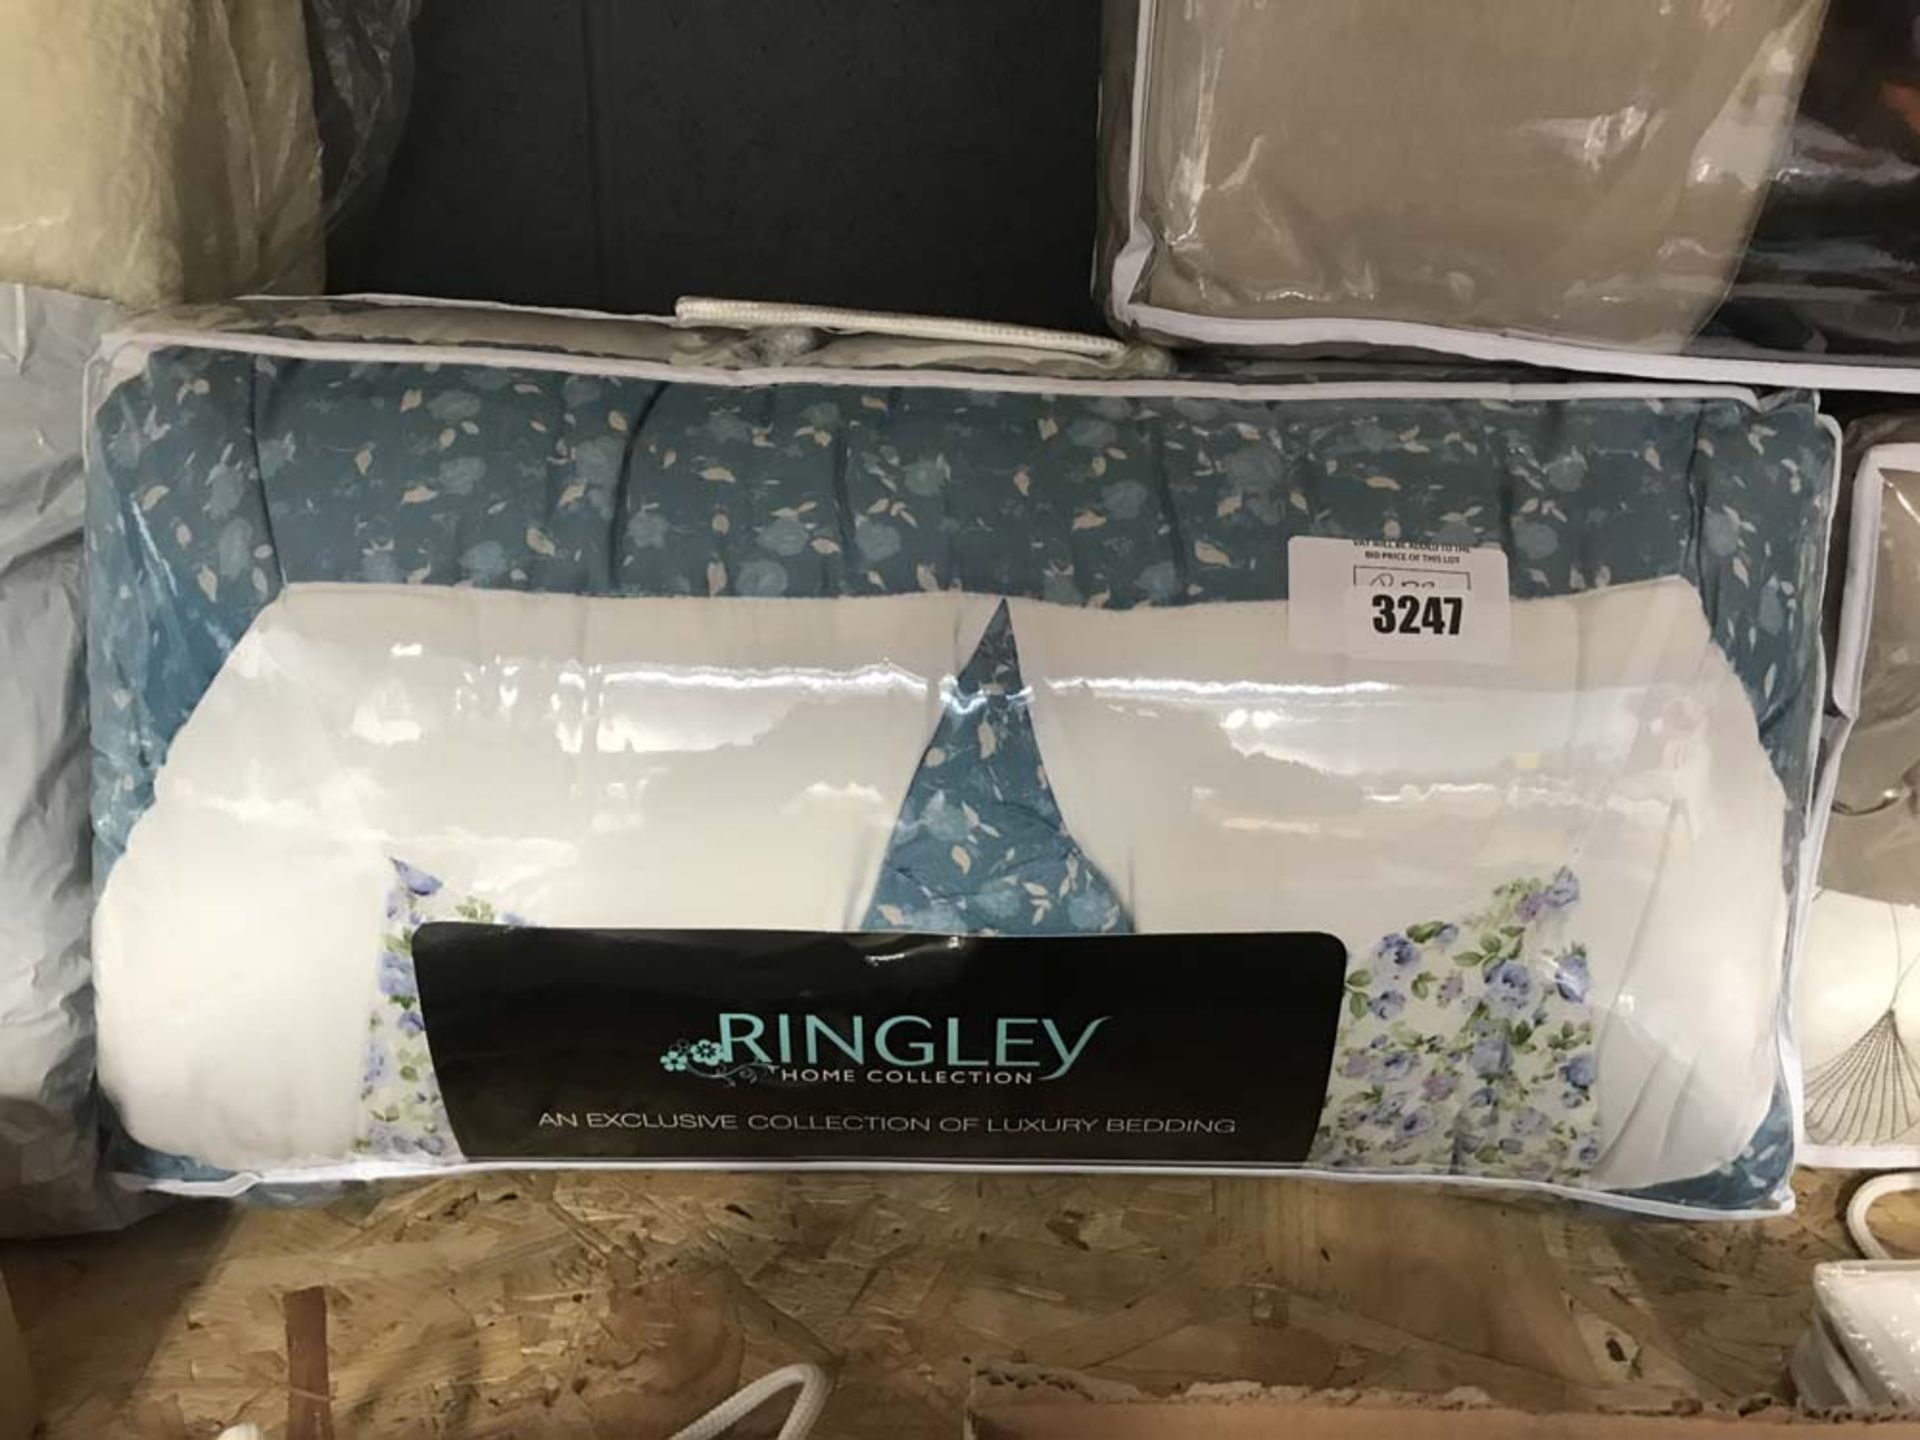 Rigeley Home Collection luxury bedding set